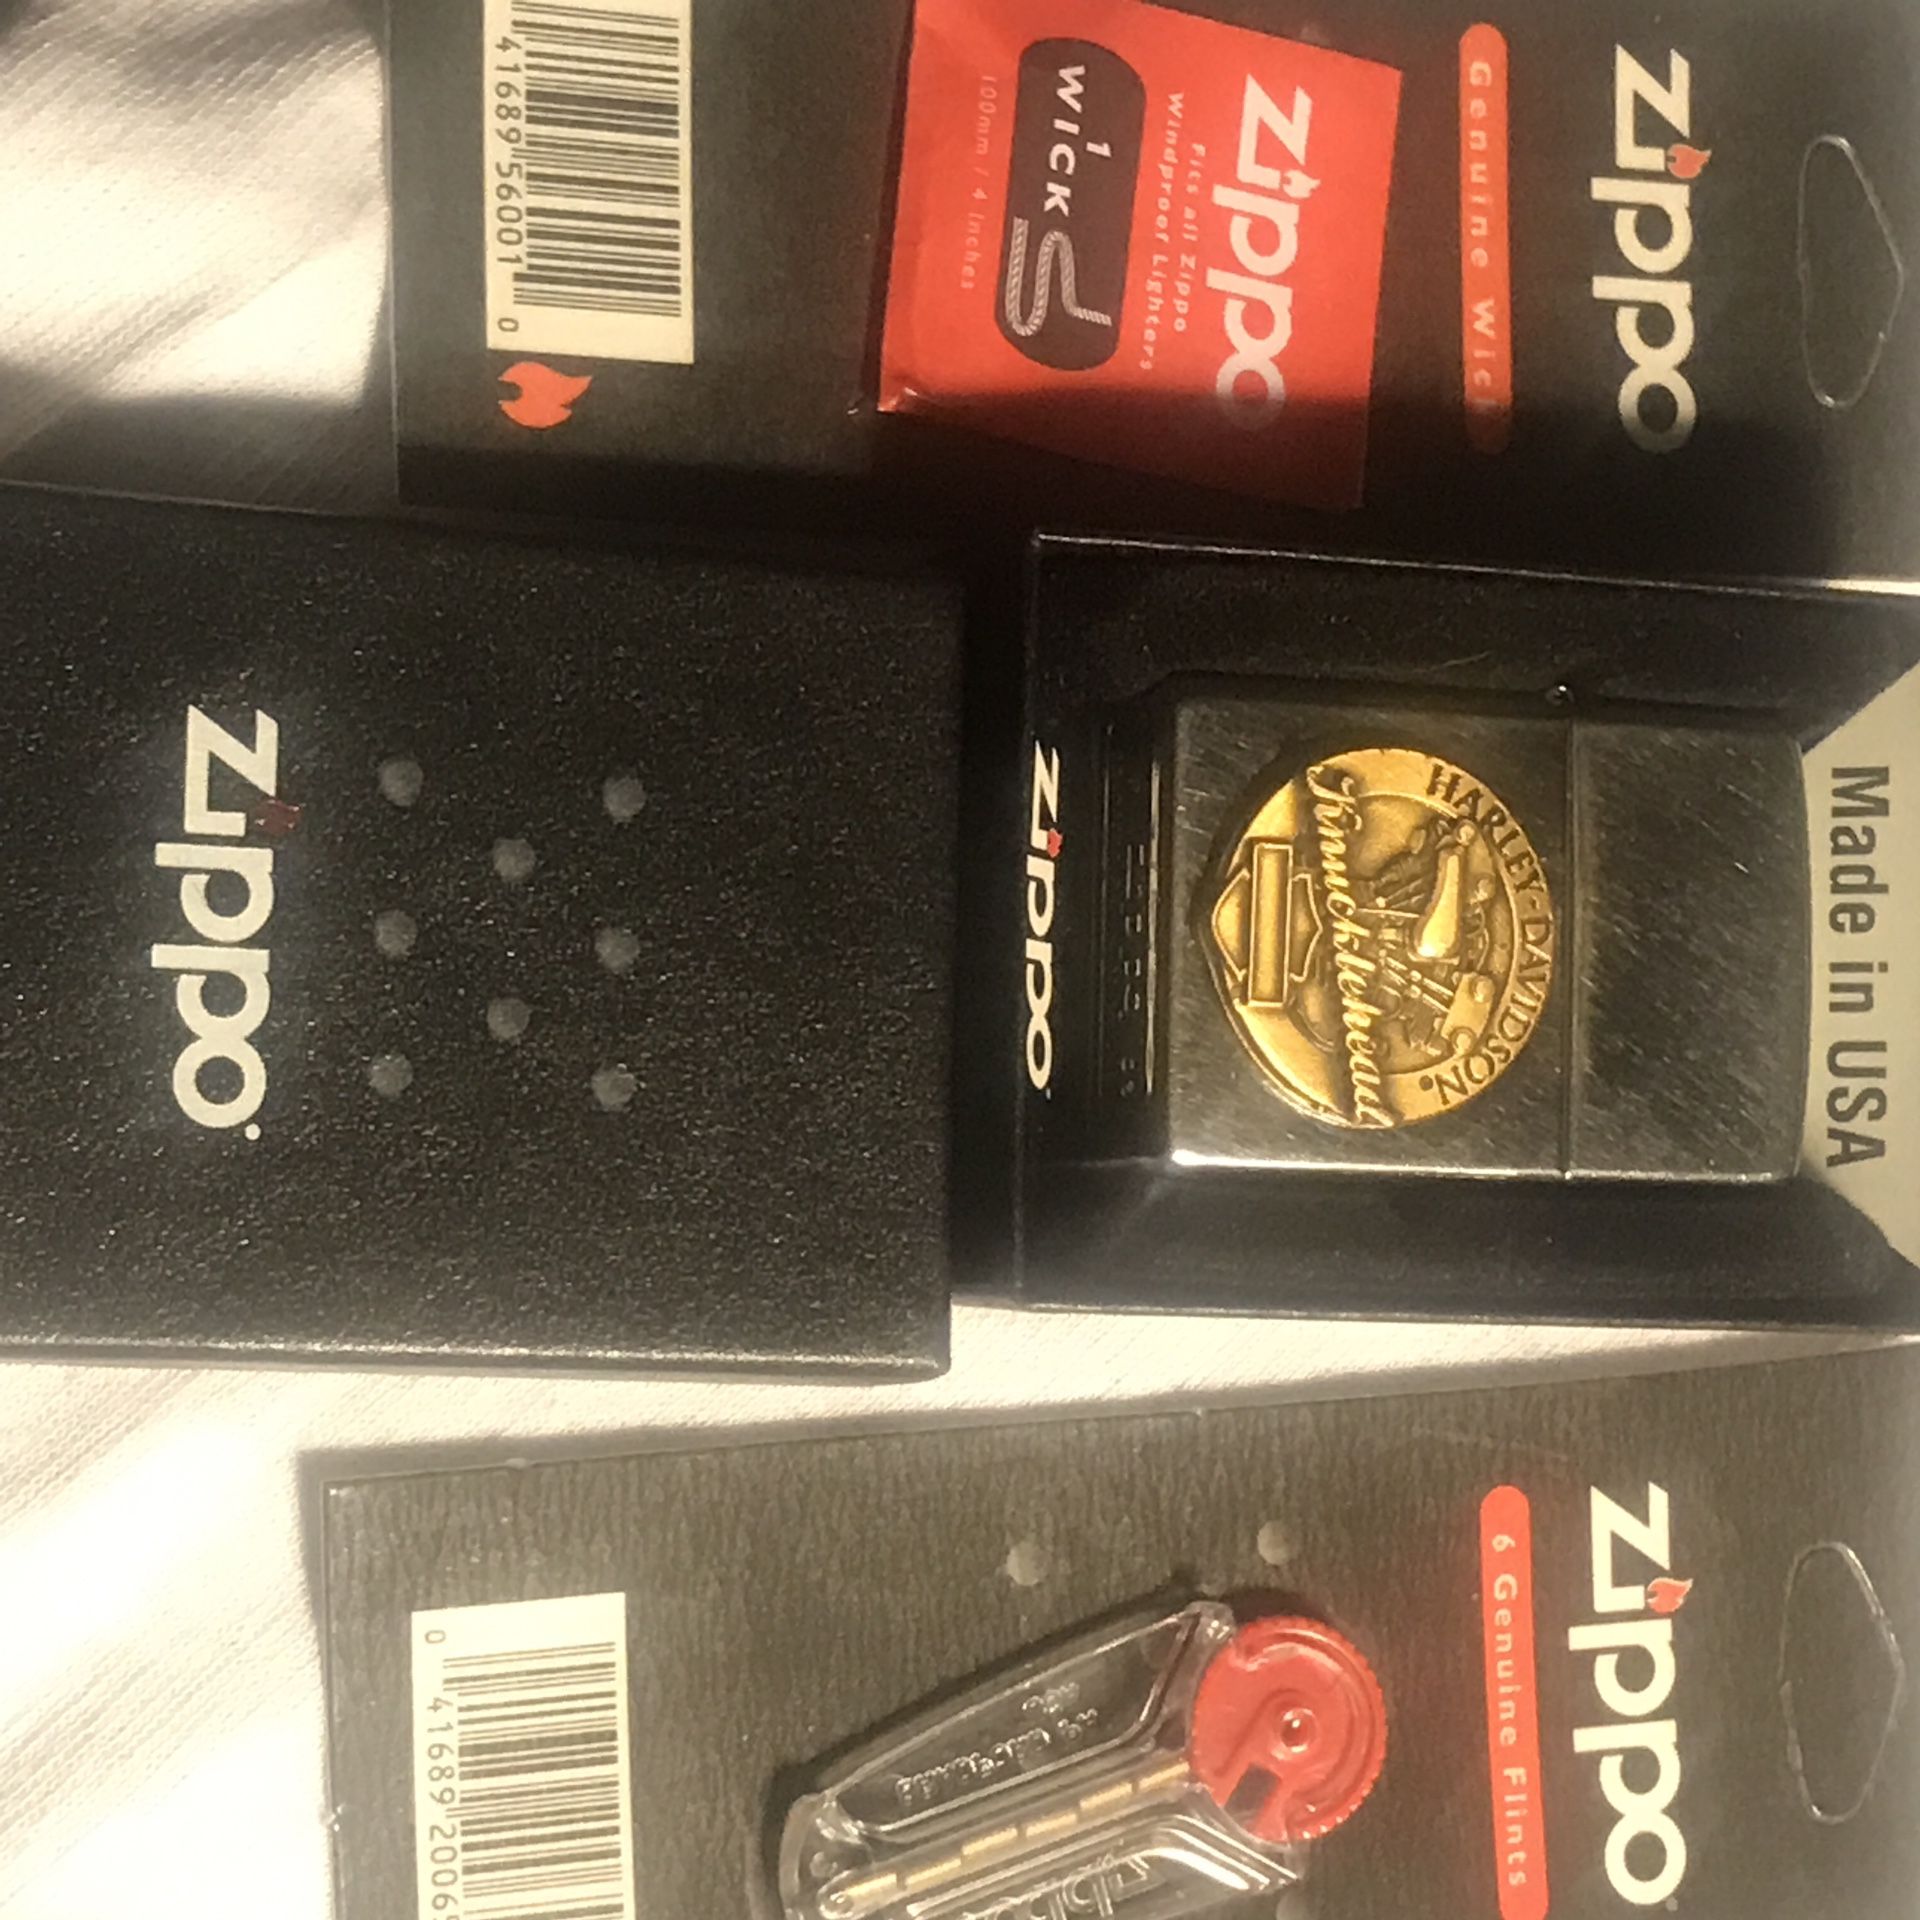 Harley Brushed Chrome Zippo Lighter knucklehead comes with 6 Zippo Flints and a Zippo Wick Brand New in Box